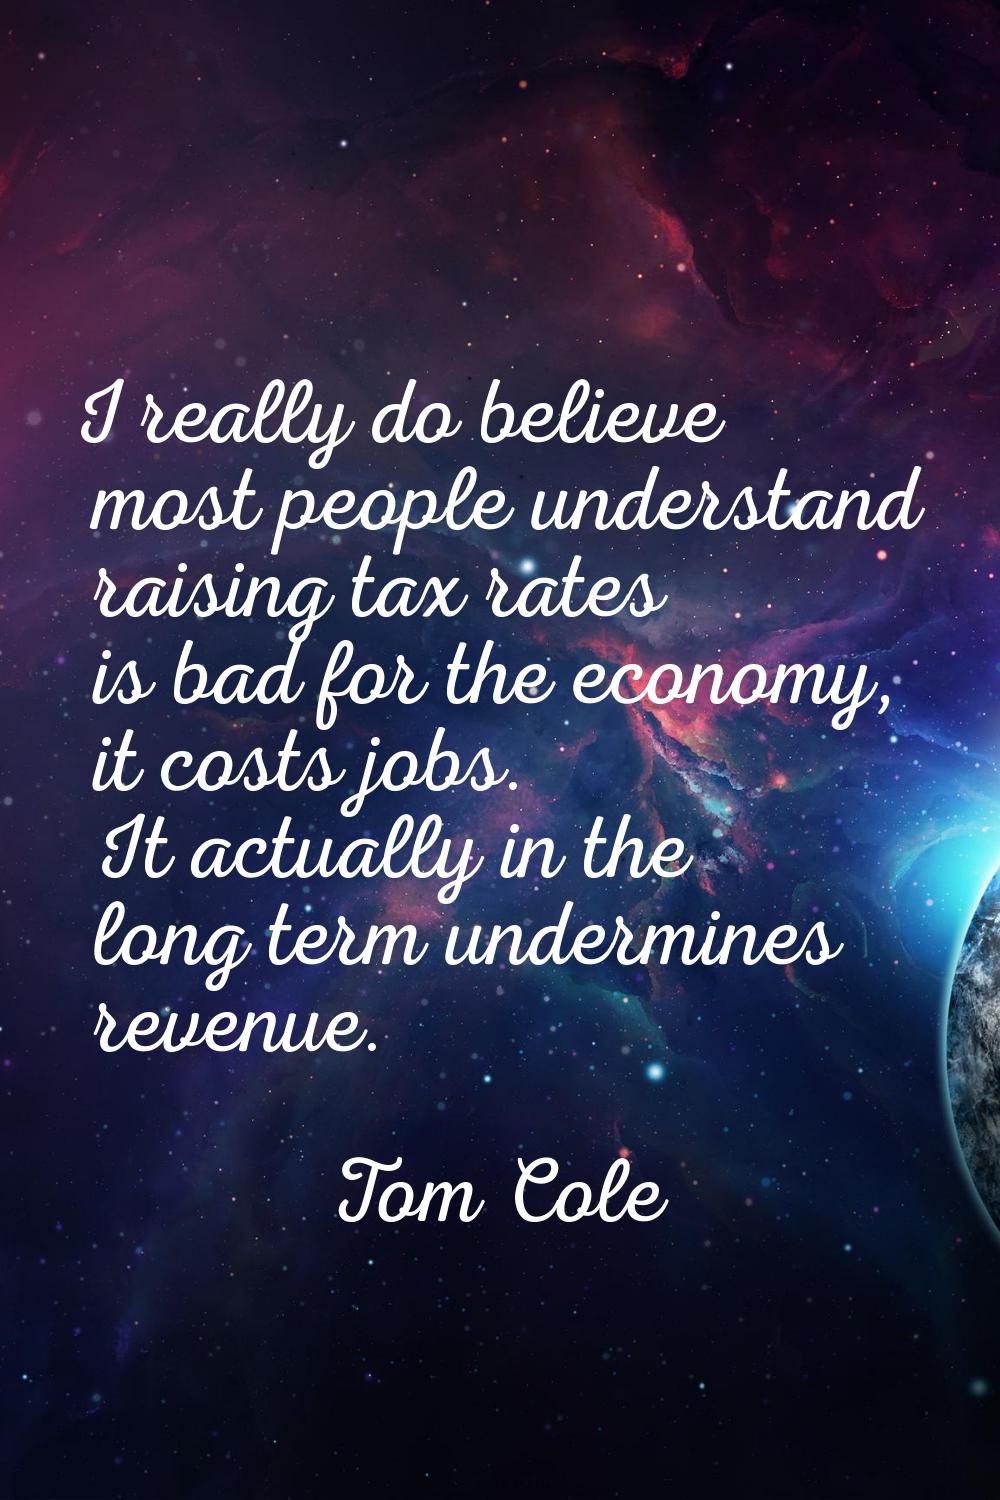 I really do believe most people understand raising tax rates is bad for the economy, it costs jobs.